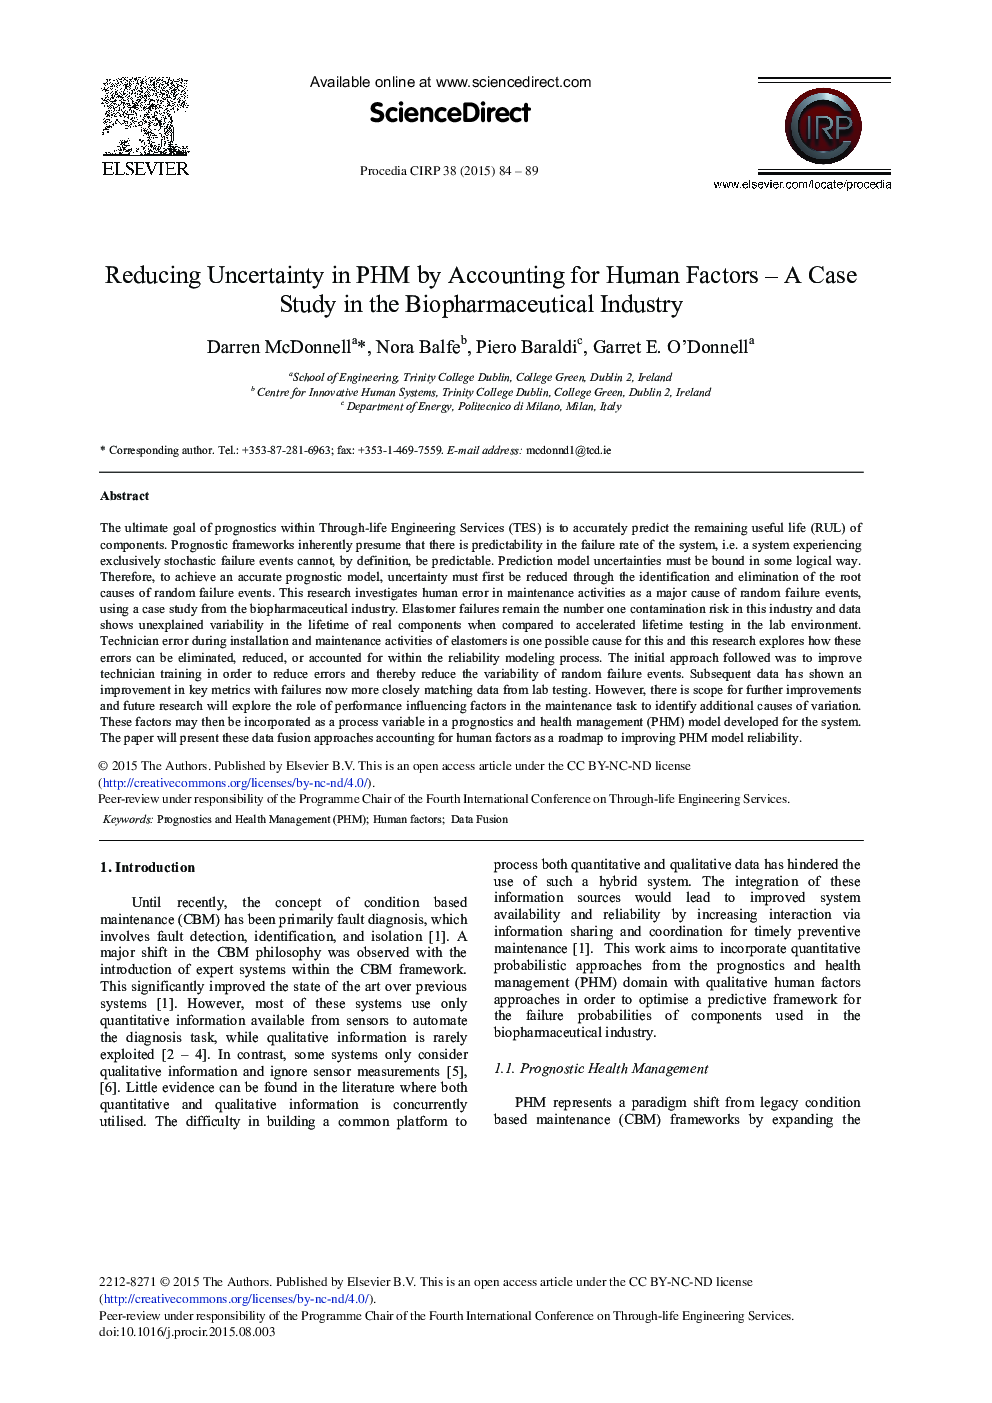 Reducing Uncertainty in PHM by Accounting for Human Factors - A Case Study in the Biopharmaceutical Industry